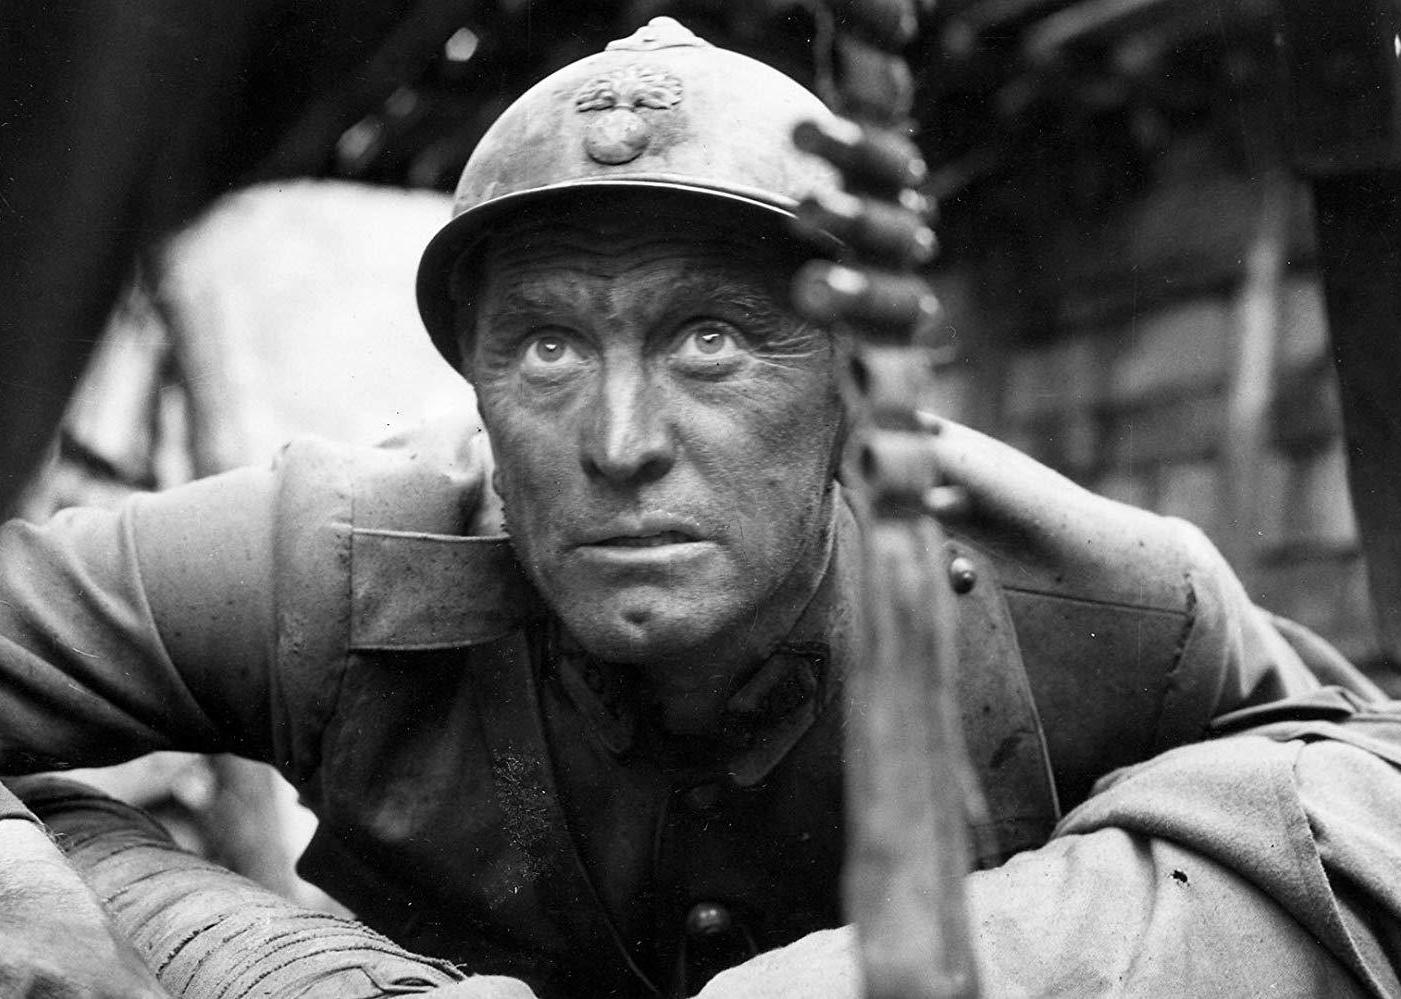 Kirk Douglas in a scene from Paths of Glory.